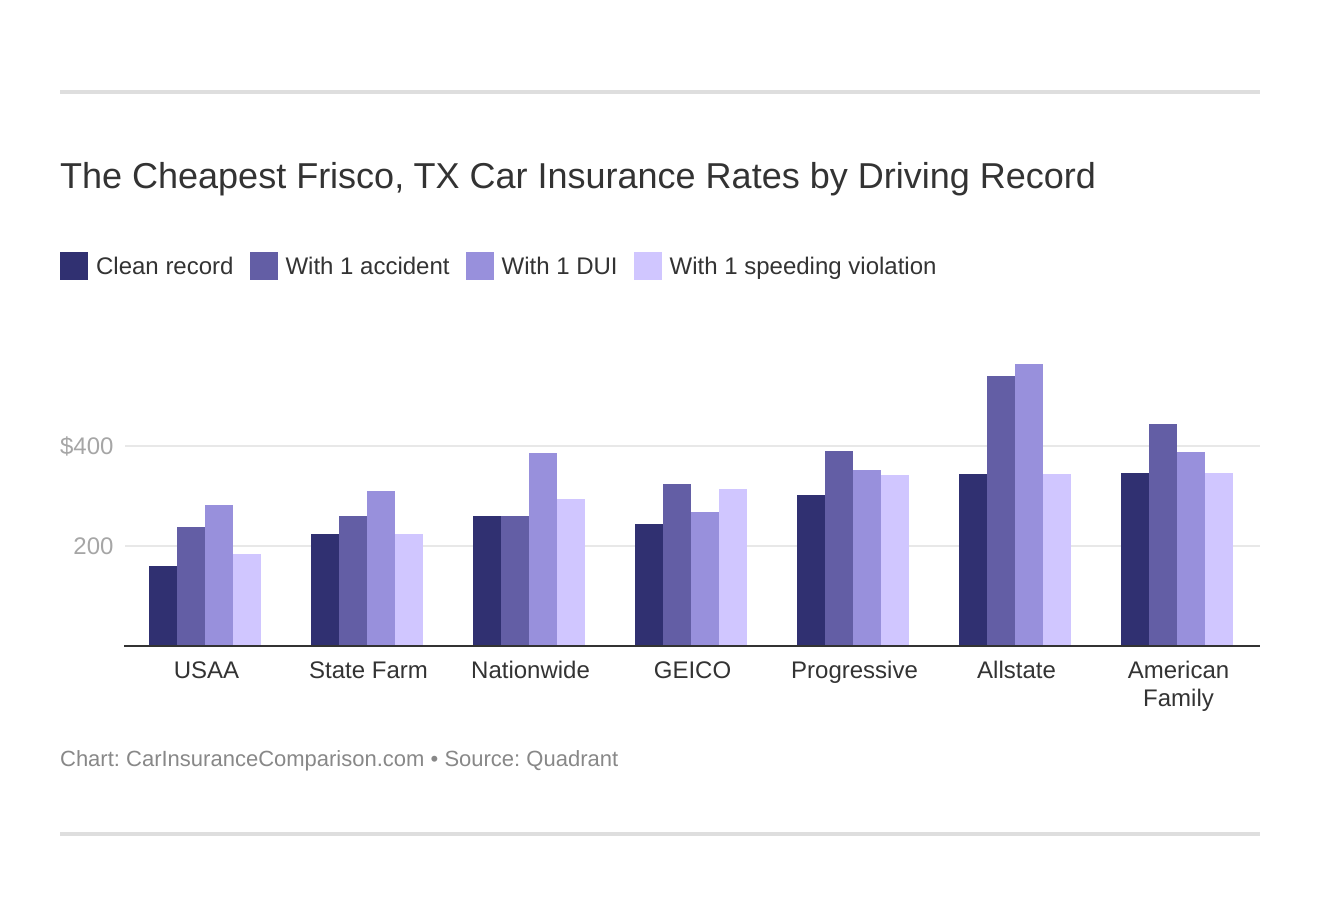 The Cheapest Frisco, TX Car Insurance Rates by Driving Record